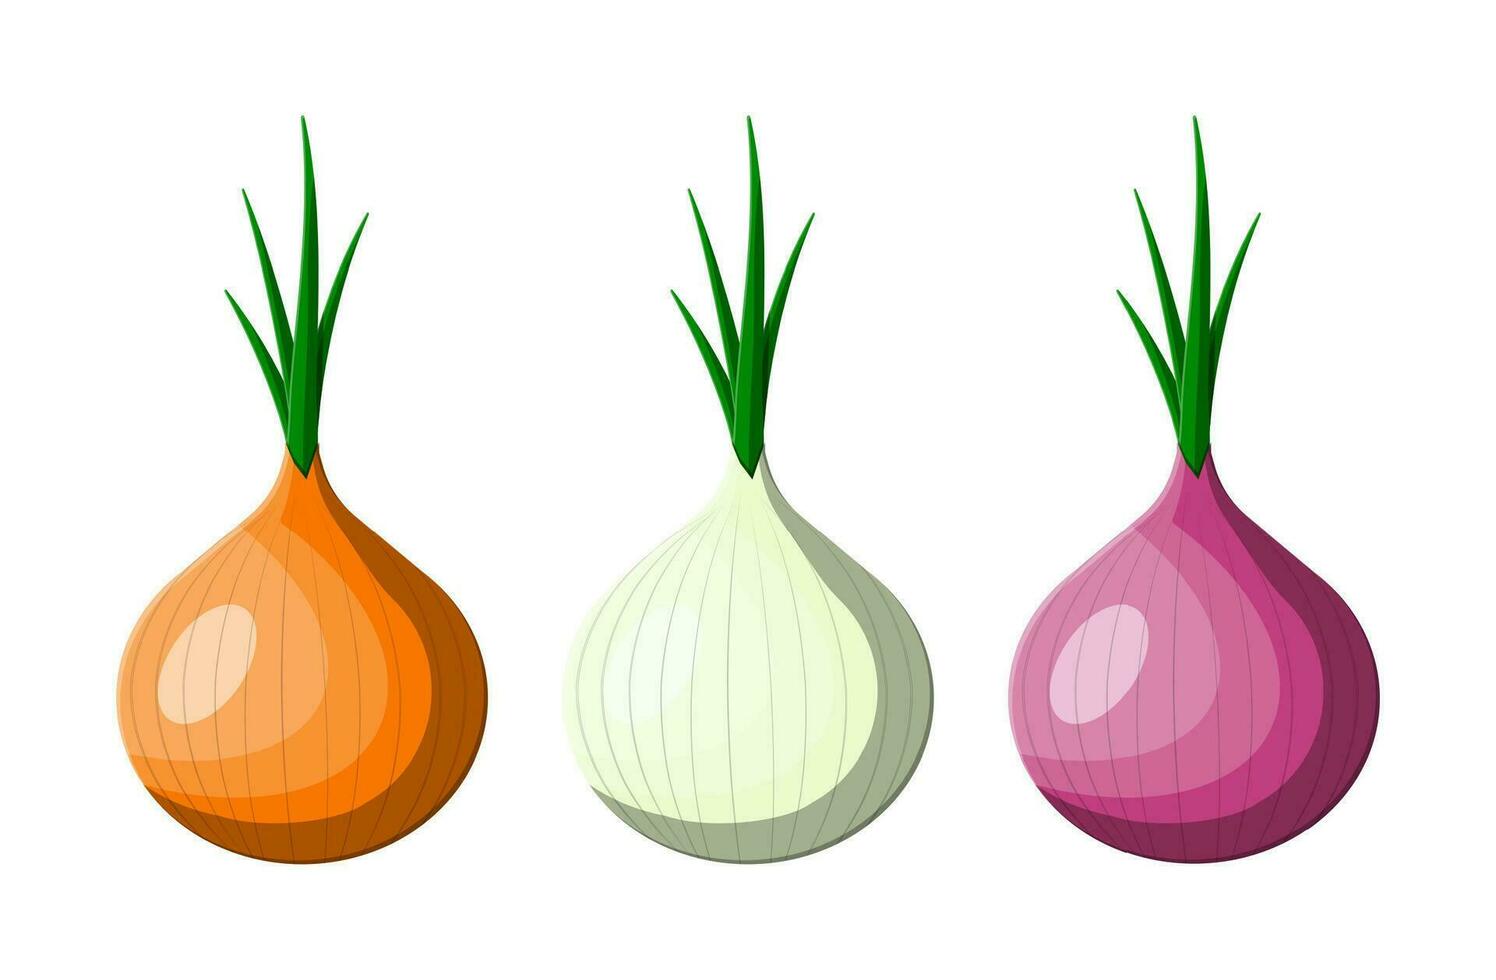 Onion vegetable isolated on white. Organic healthy food. Vegetarian nutrition. Vector illustration in flat style